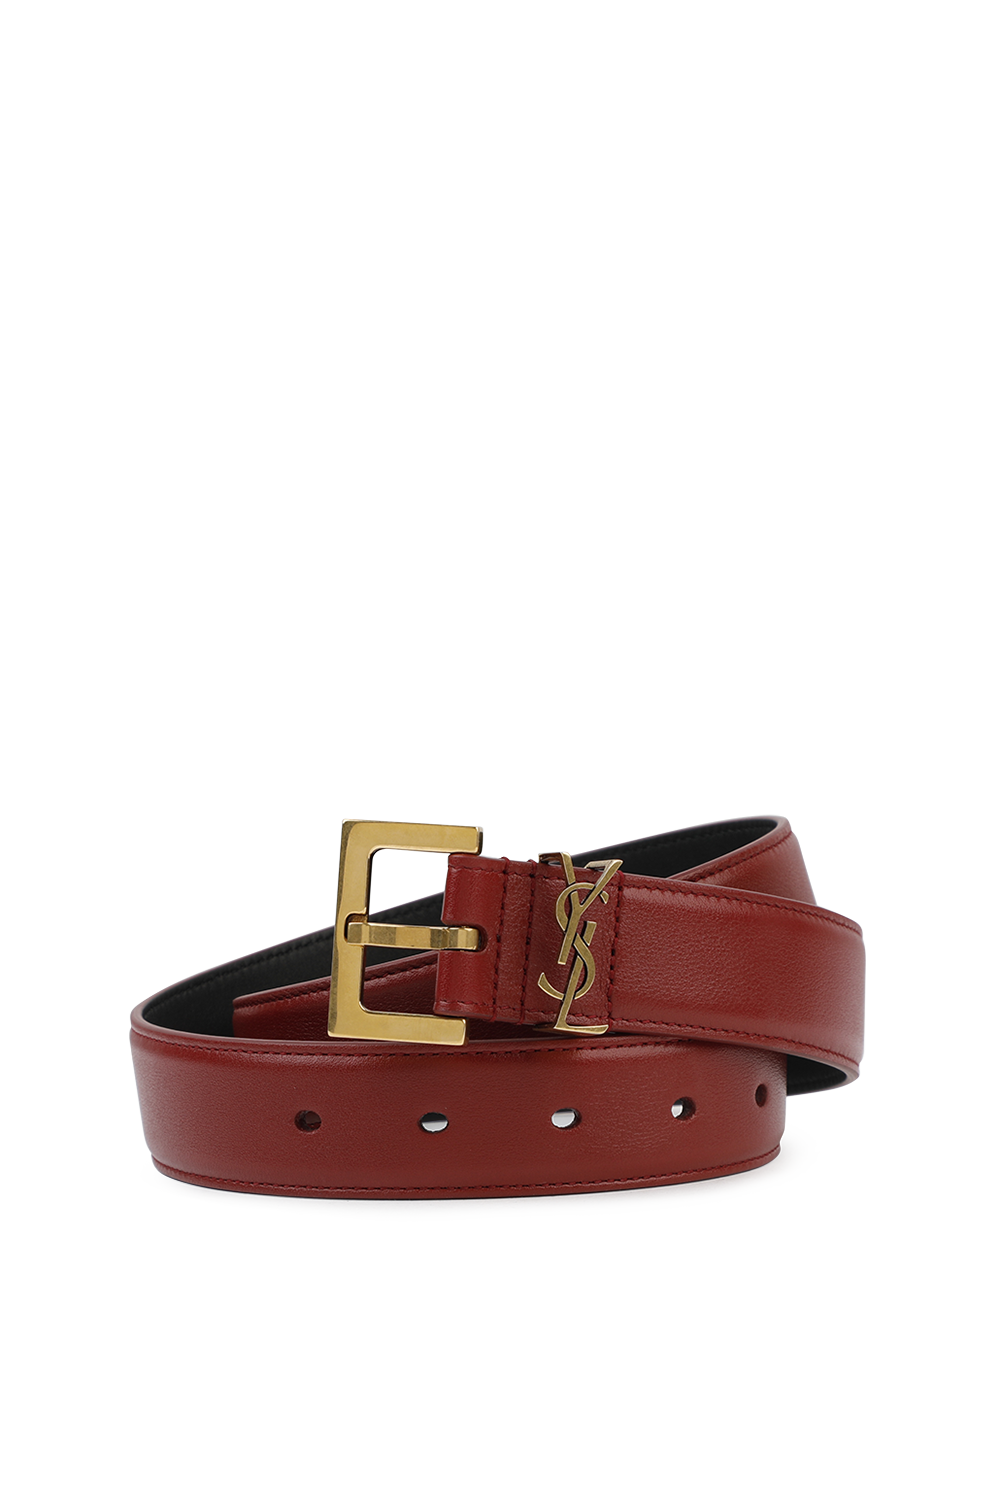 Monogram Belt in Red Leather and Gold SAINT LAURENT